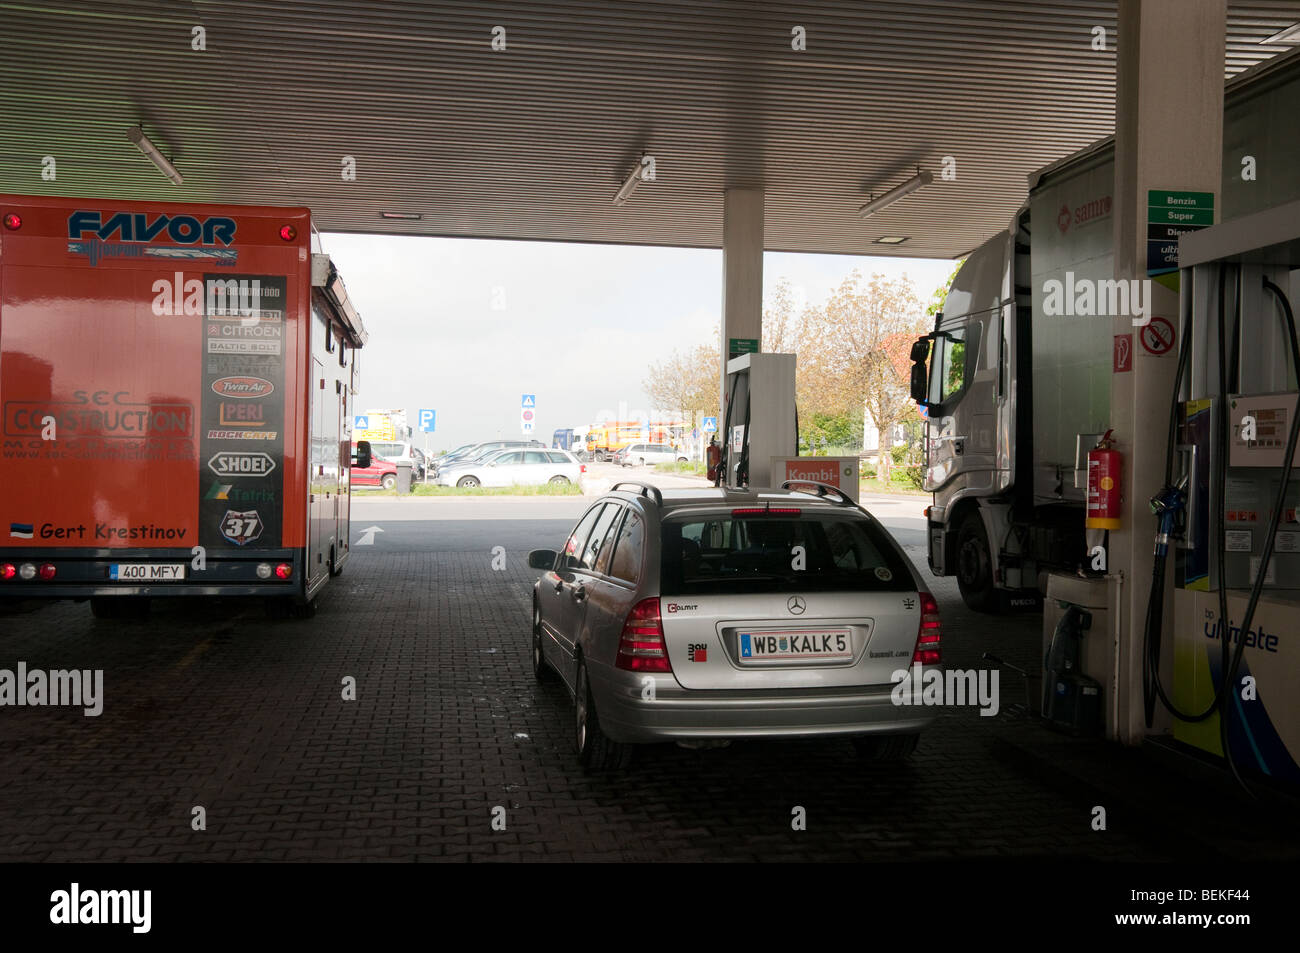 Petrol / Gas filling station in Linz Austria Europe Stock Photo